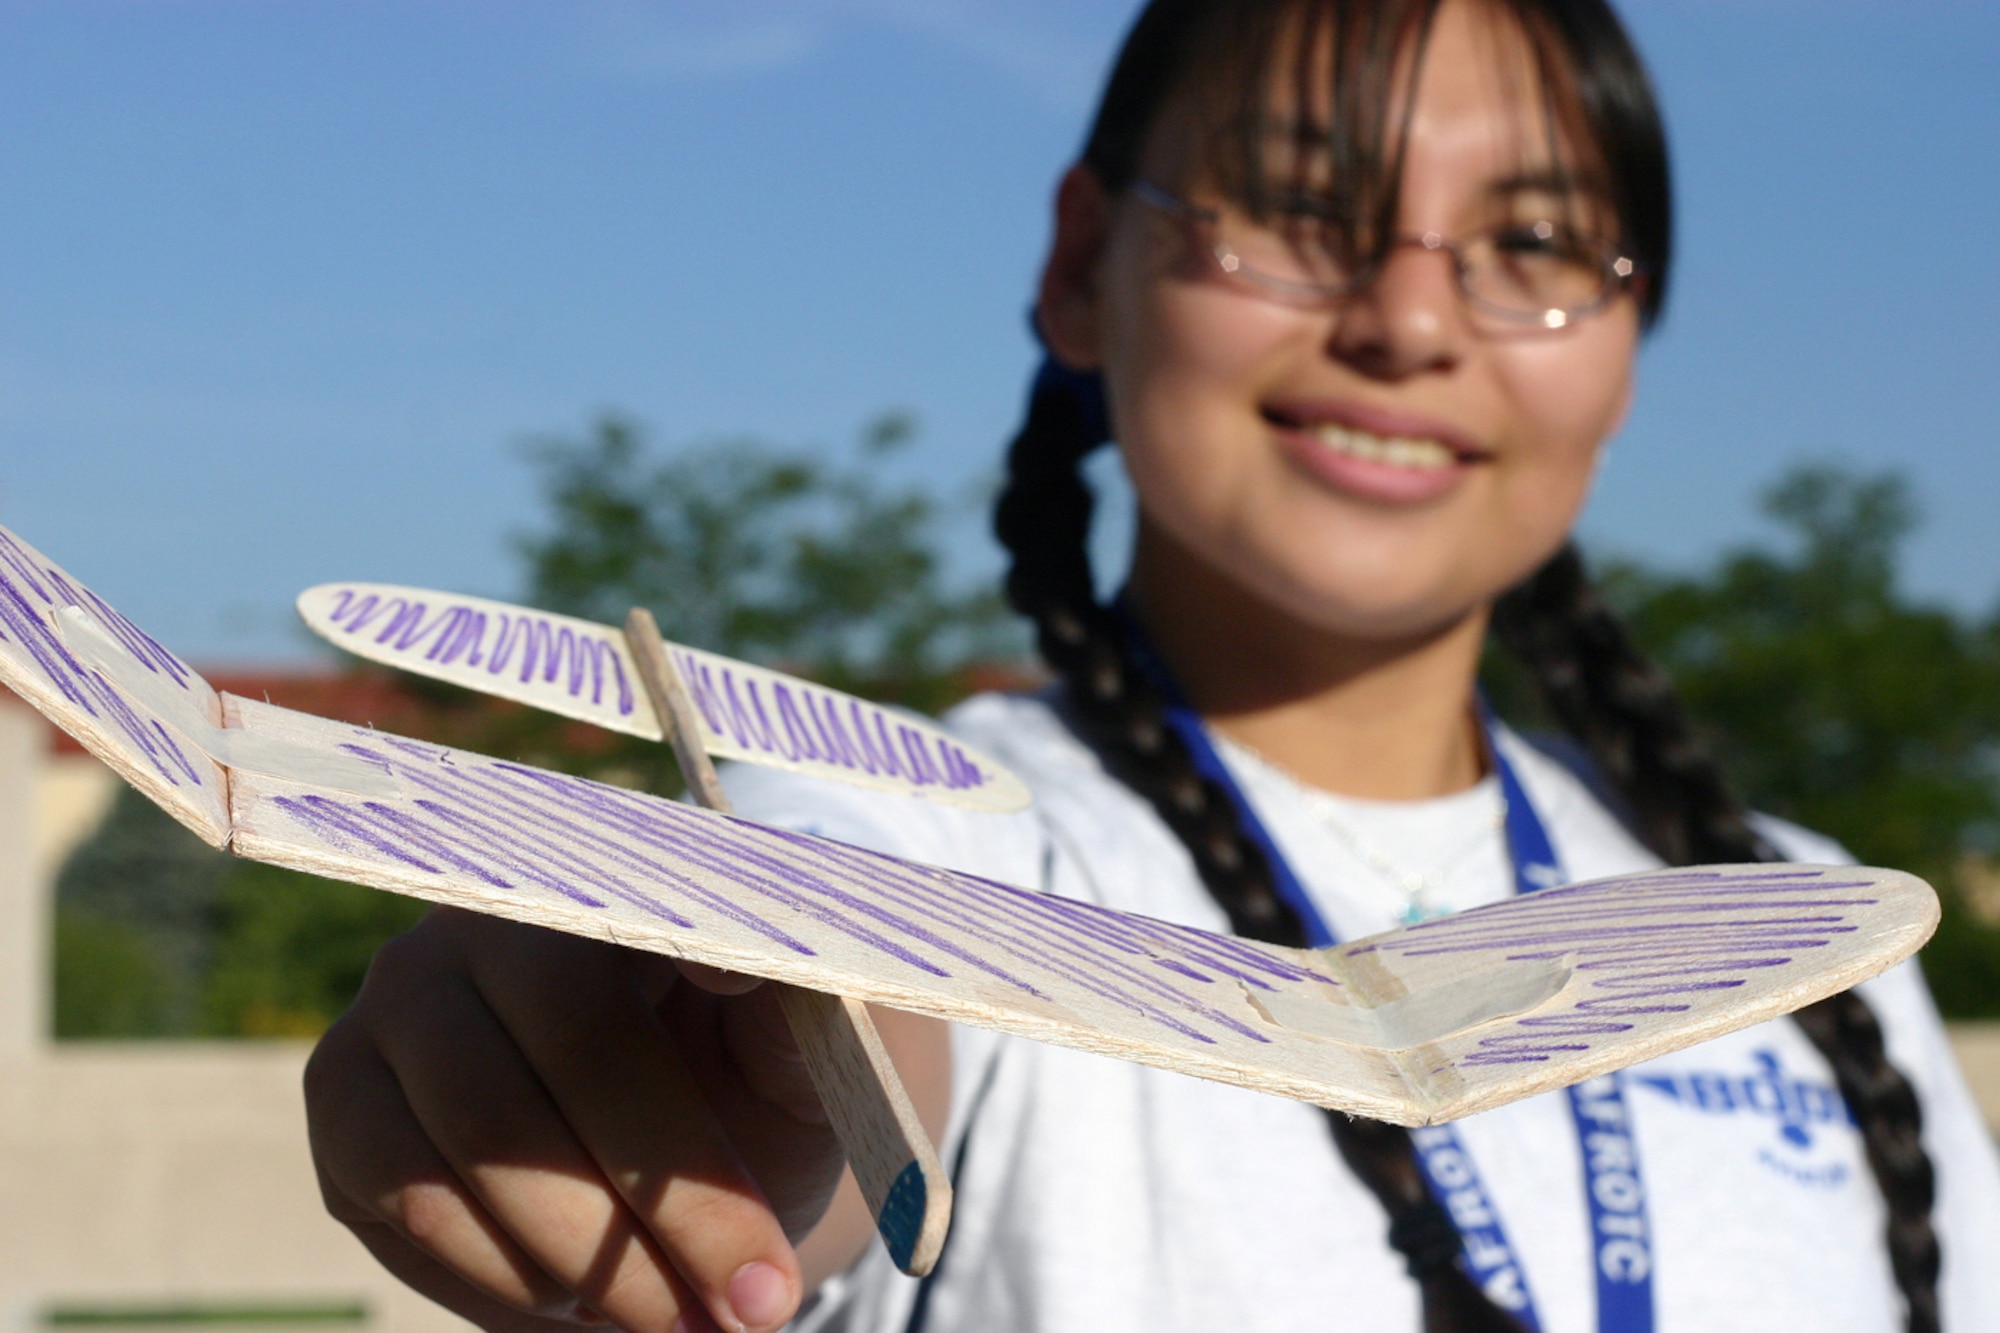 Air Force Junior ROTC Cadet Rosa Lopez from Texas shows off her team's handmade glider during the Air Force Junior ROTC Aerospace and Technology Honor Camp July 31 at Albuquerque, N.M. More than 450 cadets from Junior ROTC units worldwide participated in a total of eight camps with 54 students each - half at Albuquerque. and half at Norman, Okla., and Tinker Air Force Base. Currently, there are more than 100,000 cadets in the Air Force Junior ROTC program worldwide. (U.S. Air Force photo/Staff Sgt. Jason Lake)